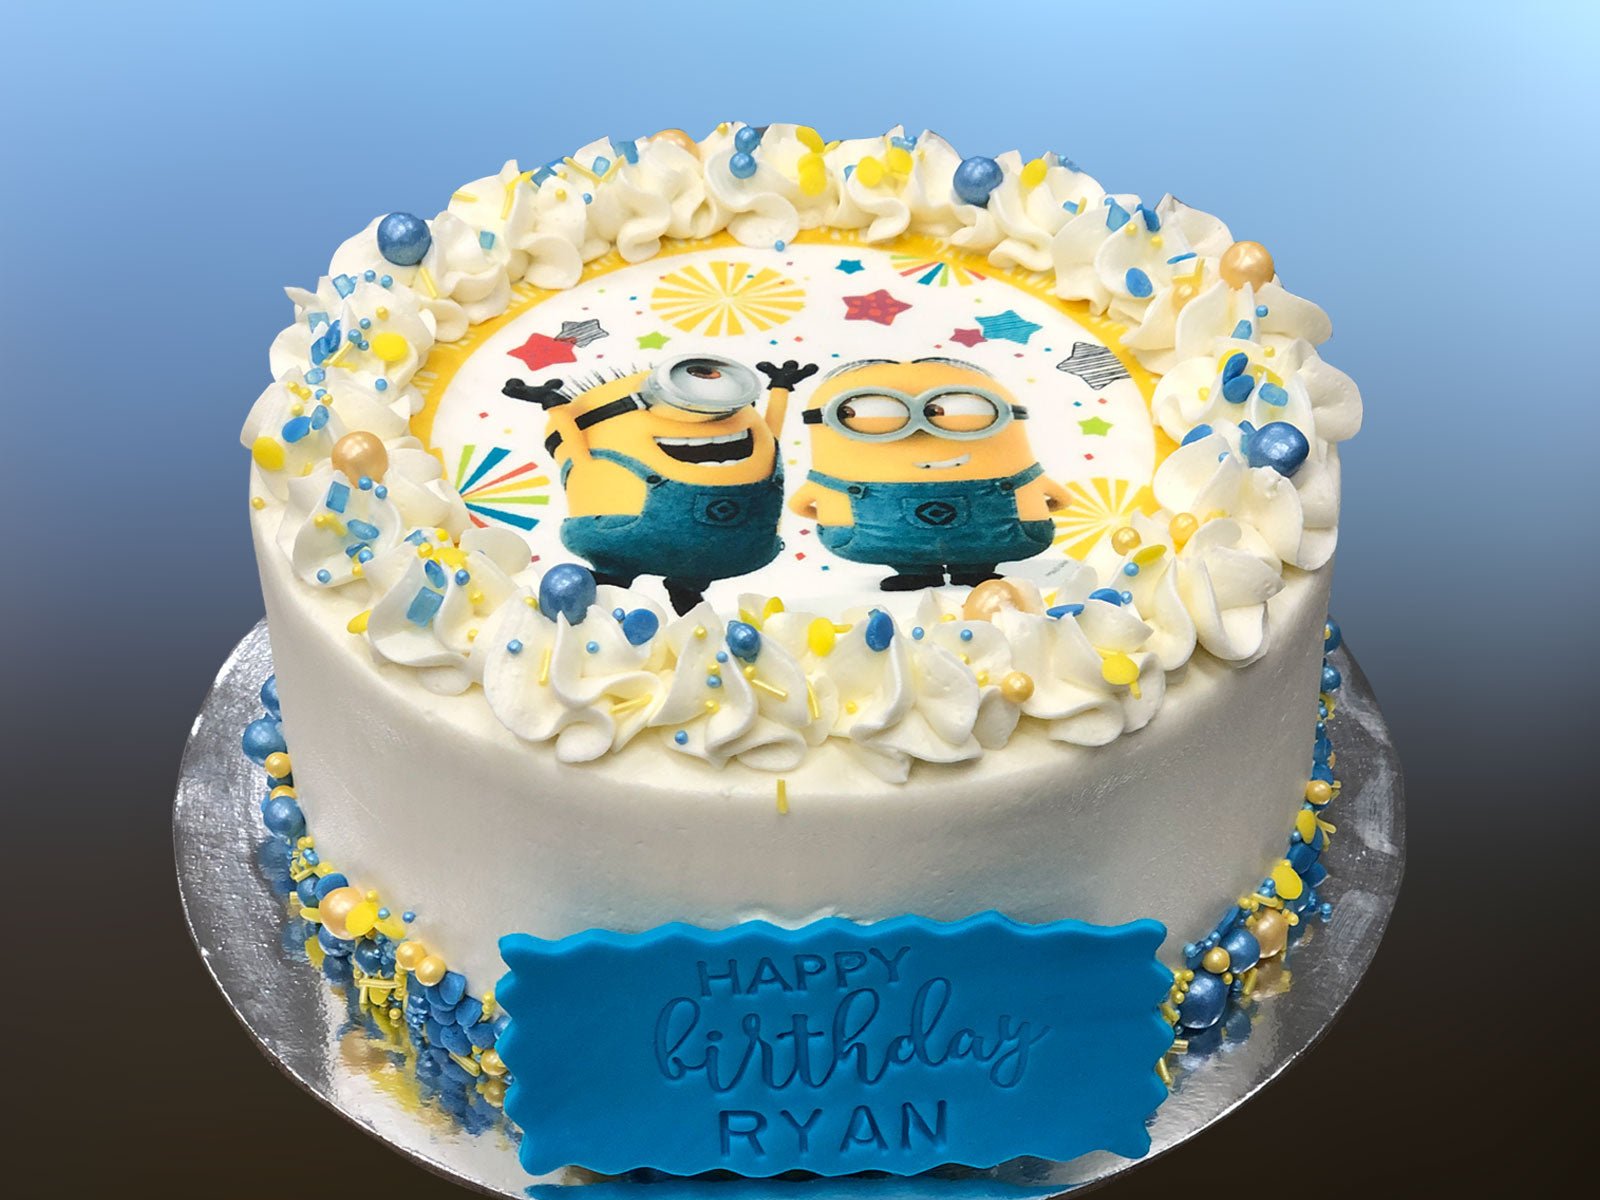 Minion Theme Fondant Cake for a Special Birthday Celebration At Home |  Hyderabad